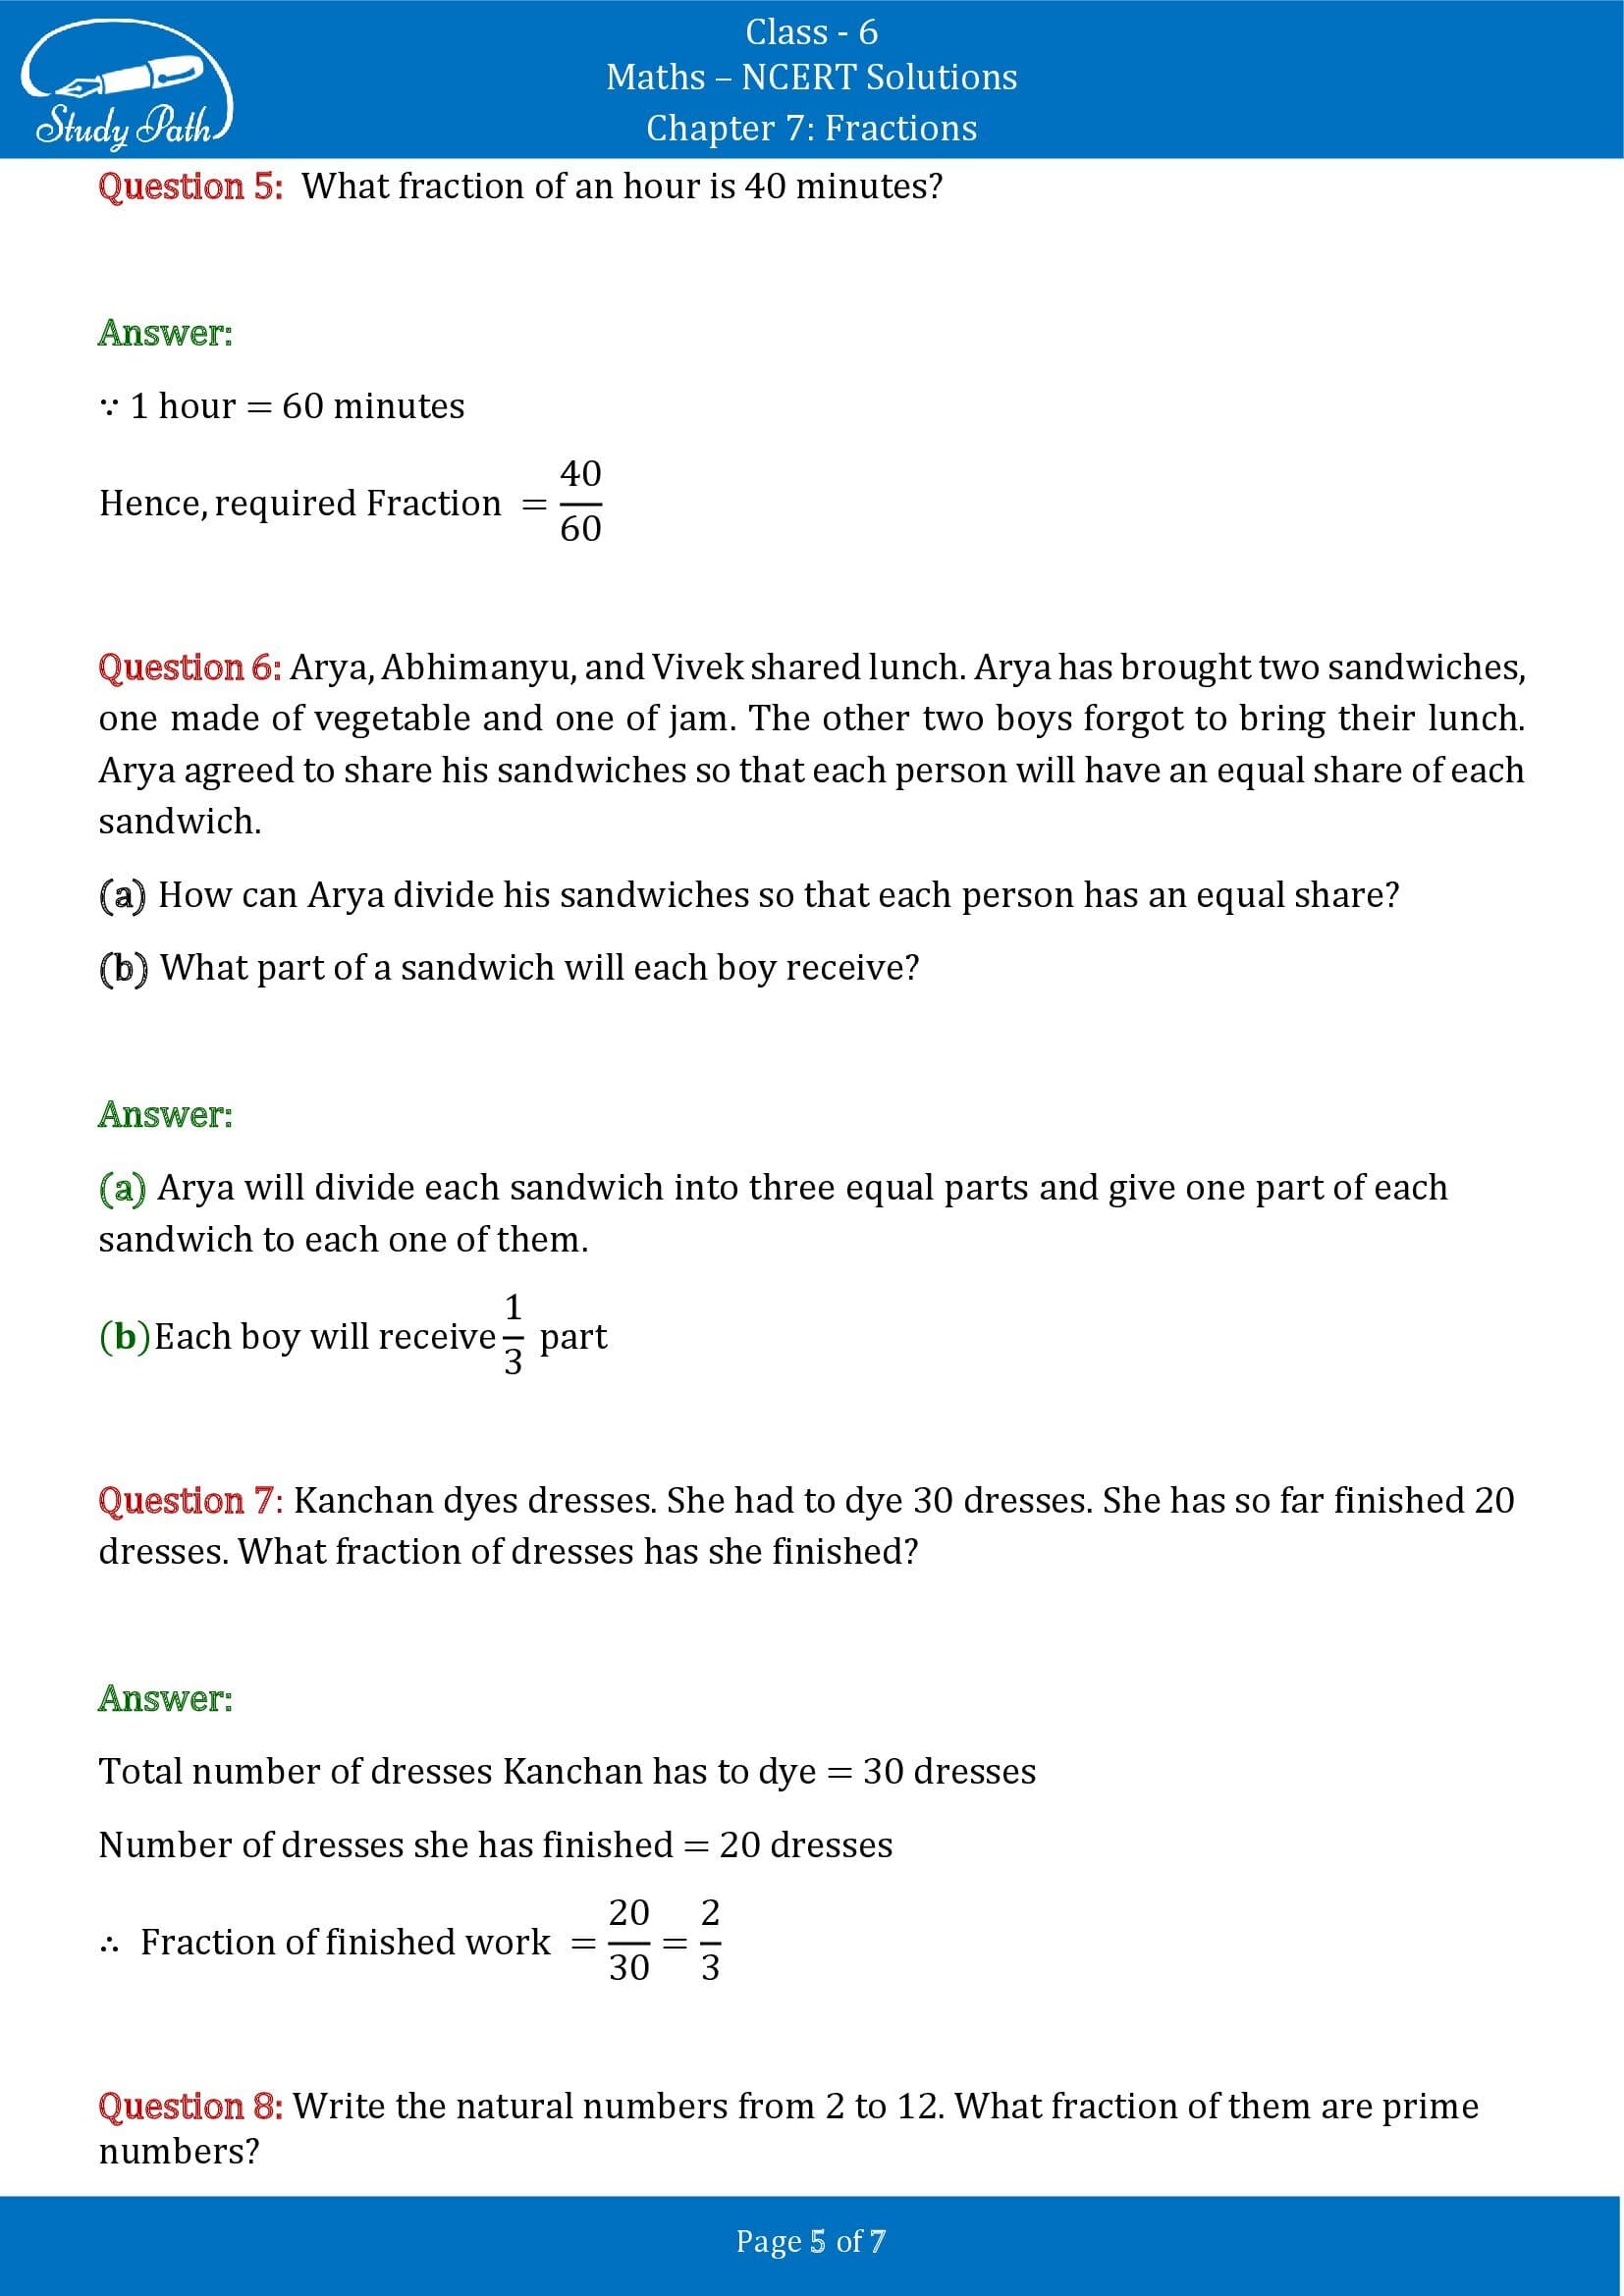 NCERT Solutions for Class 6 Maths Chapter 7 Fractions Exercise 7.1 00005